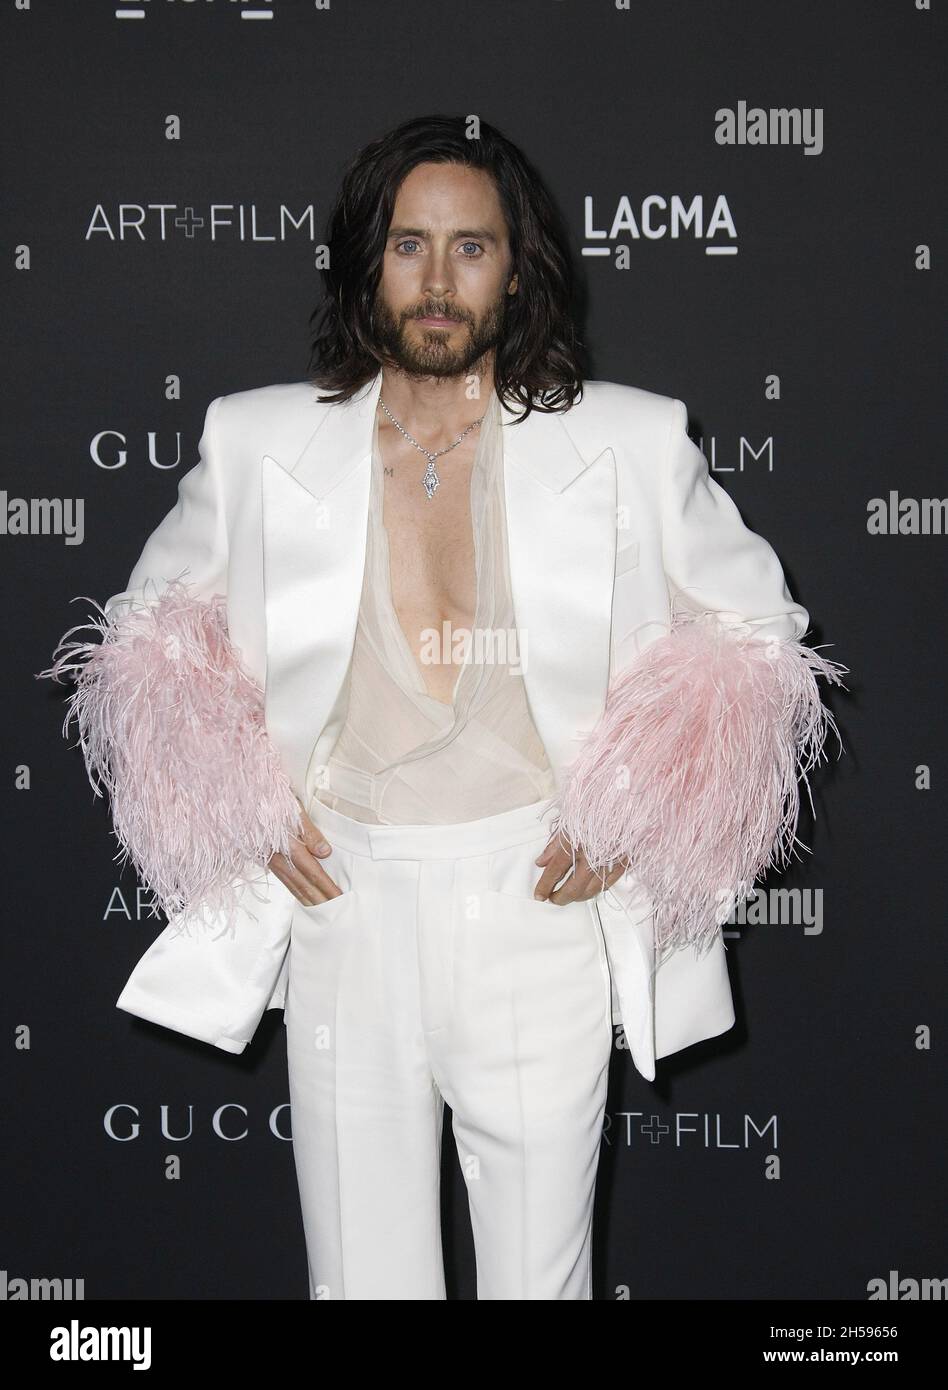 Gucci jared leto hi-res stock photography and images - Alamy